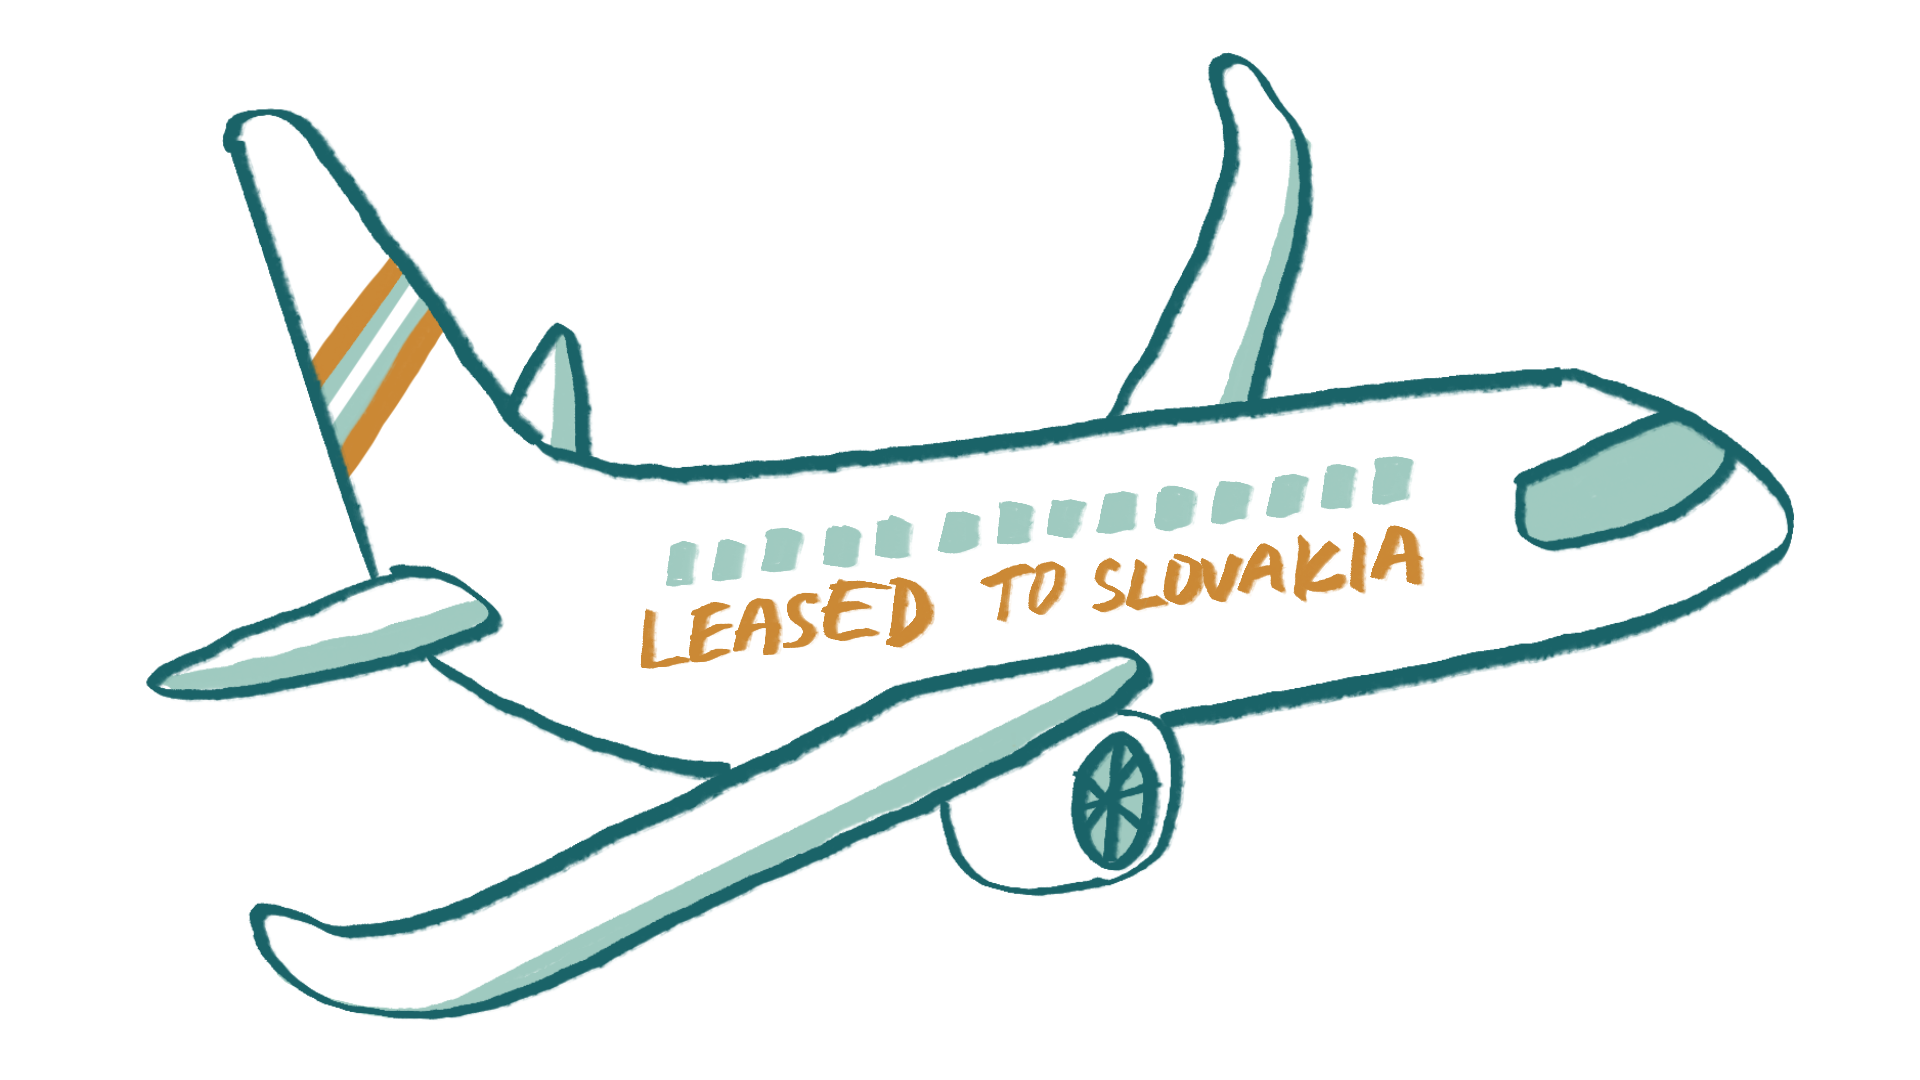 What are the specifics of aircraft leasing and aircraft repossession in Slovakia